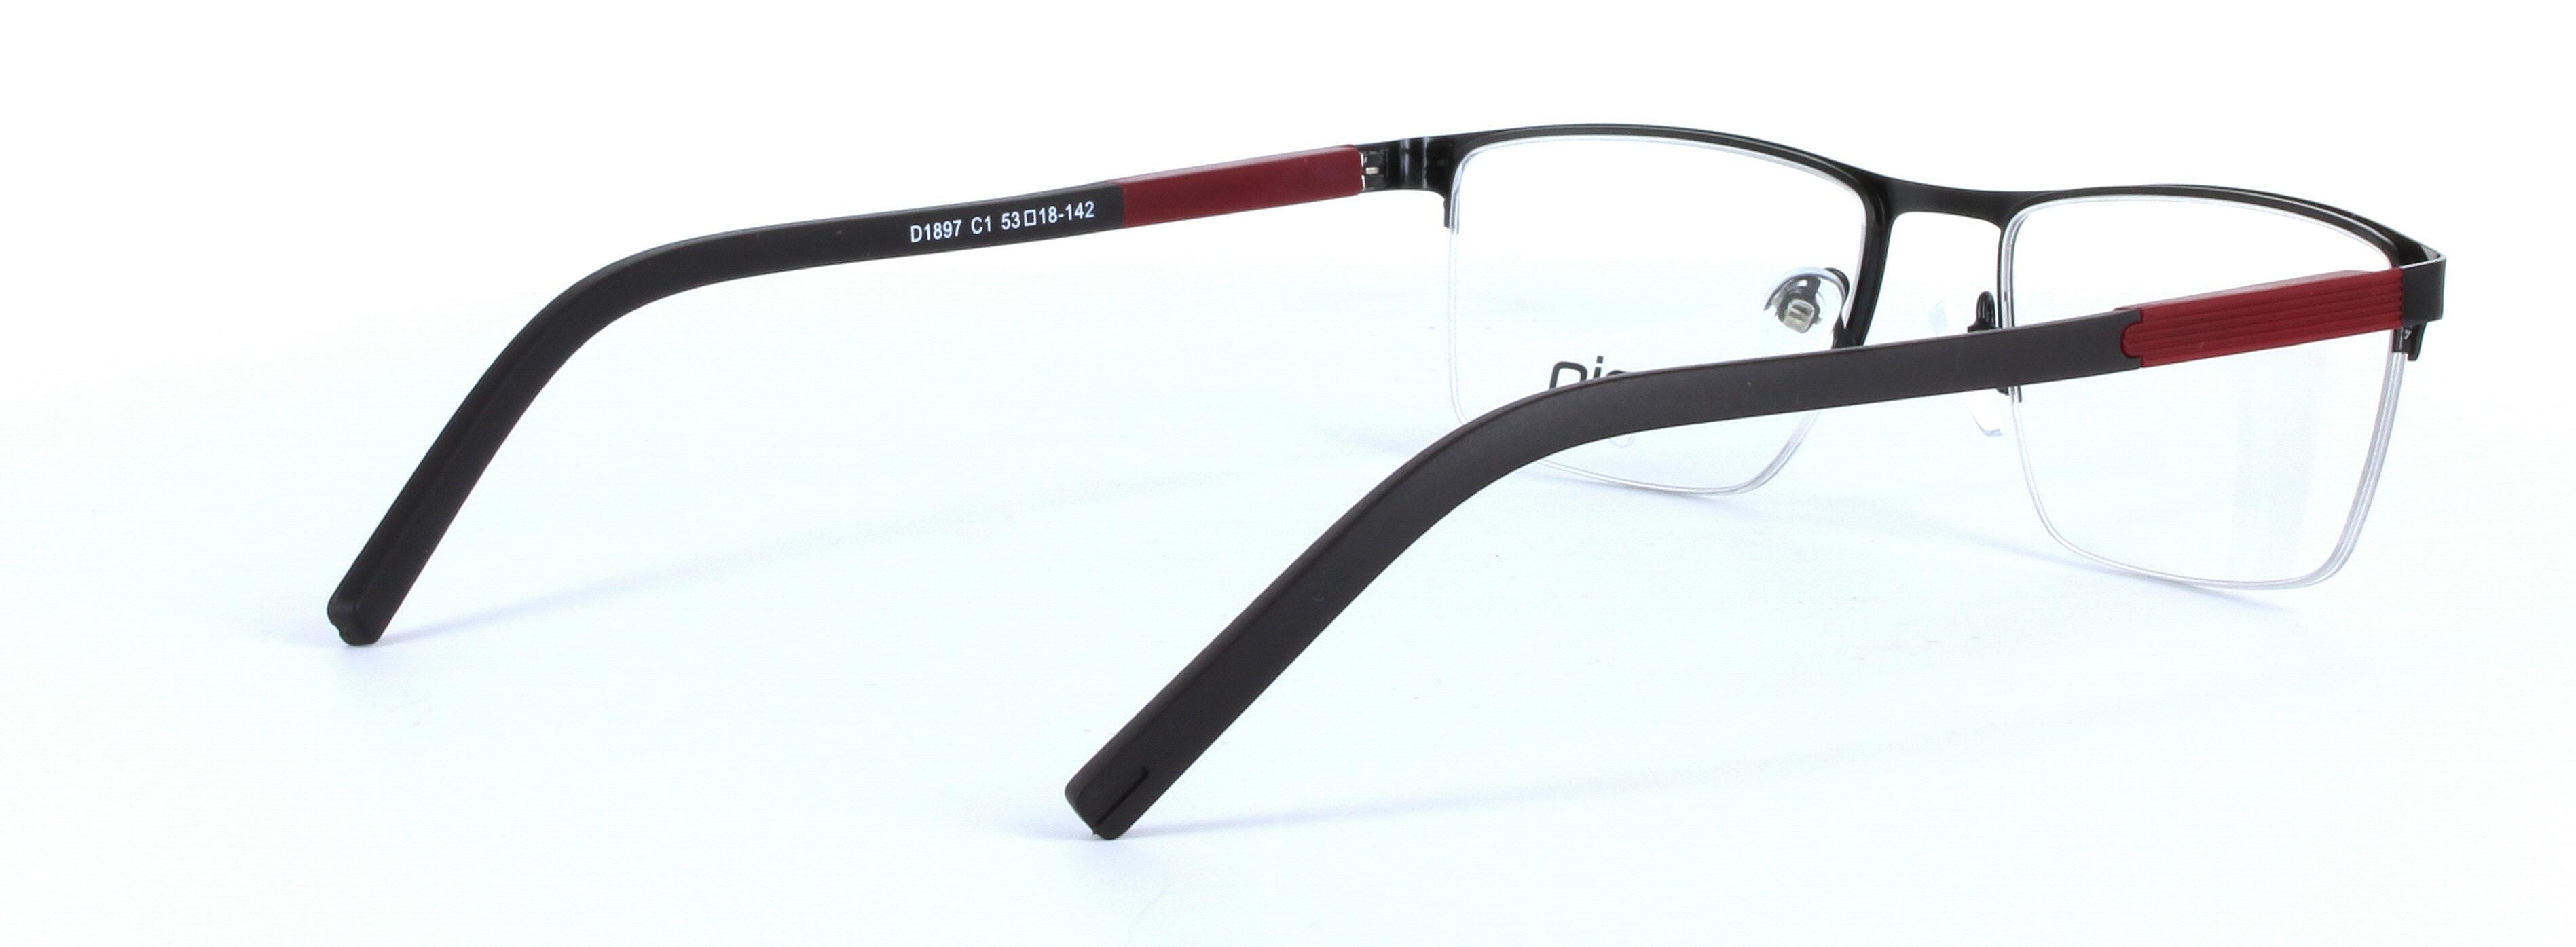 Dell Black and Red Semi Rimless Rectangular Metal Glasses - Image View 4